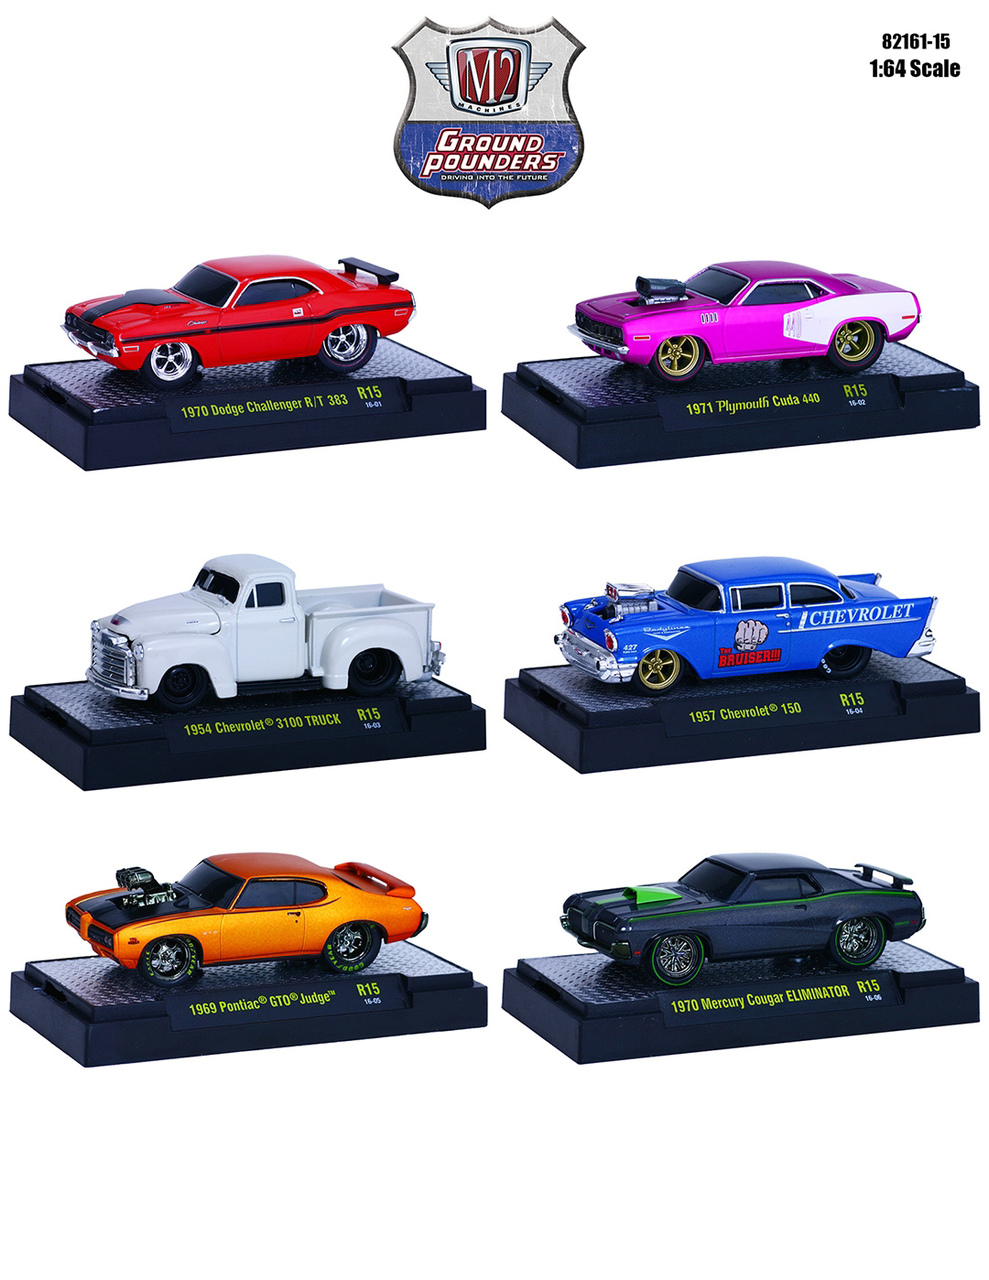 Ground Pounders 6 Cars Set Release 15 In Display Cases 1/64 Diecast Model Cars By M2 Machines